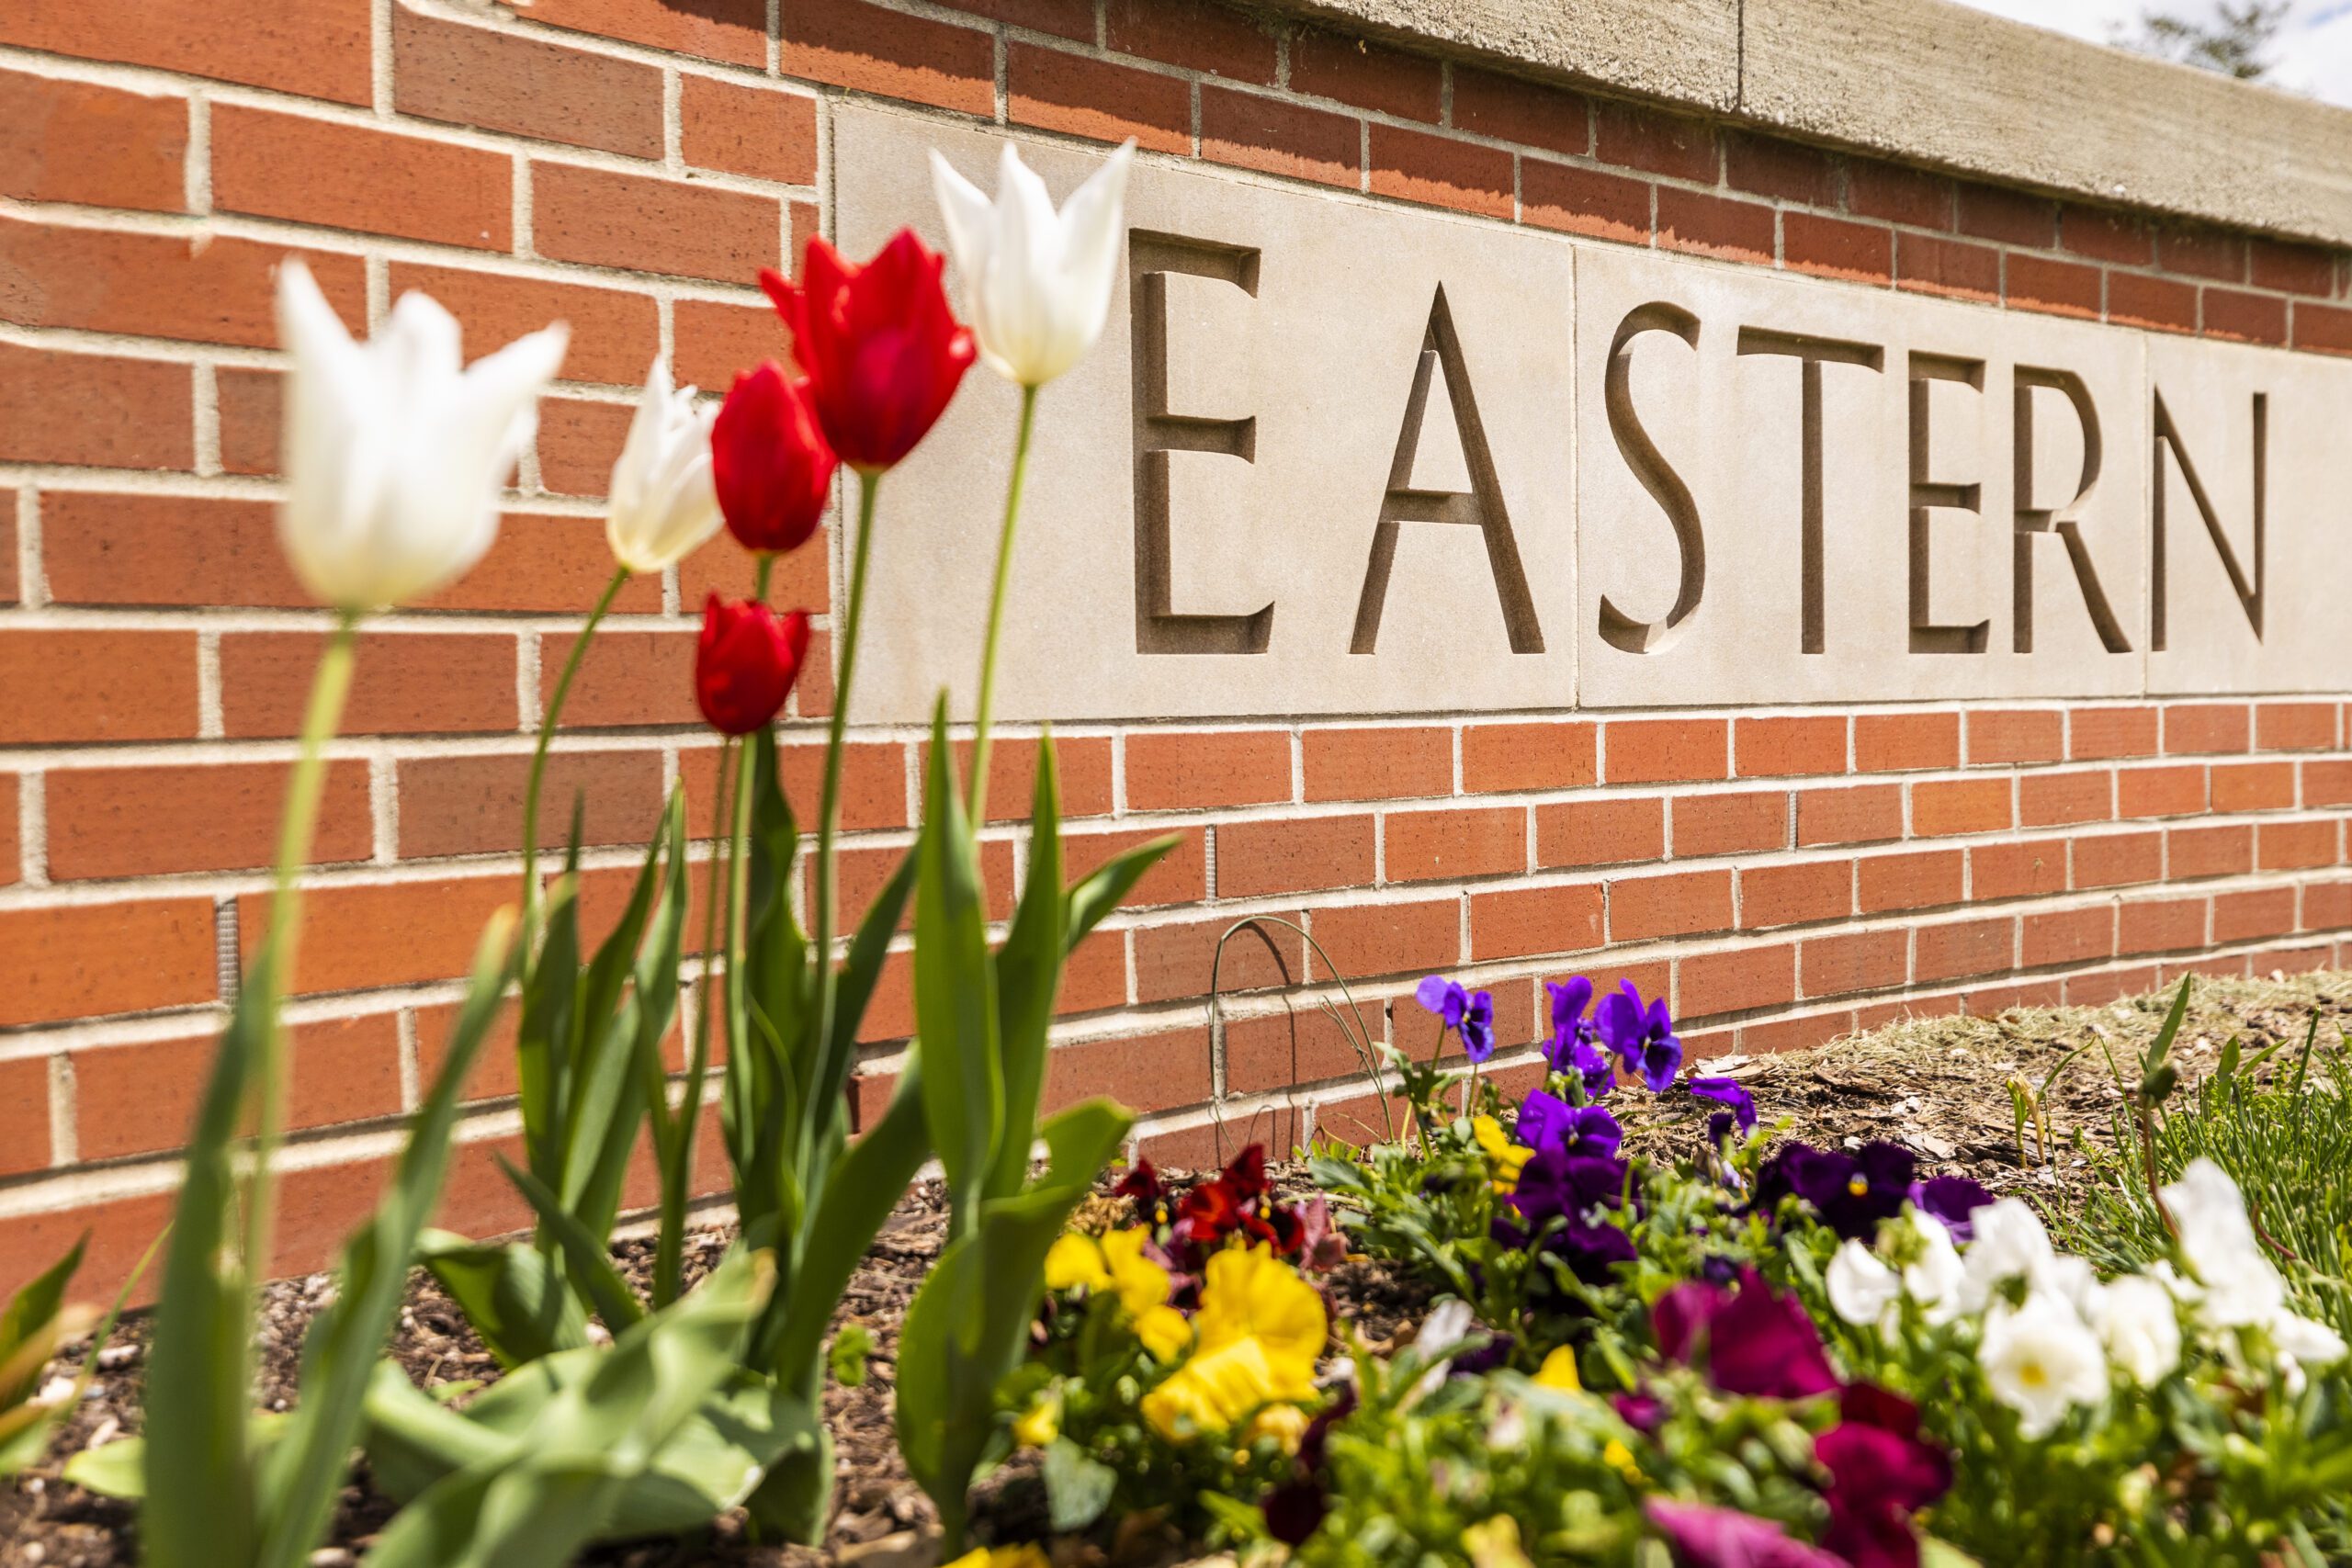 An image of red and white tulips in front of an Eastern Kentucky University sign.